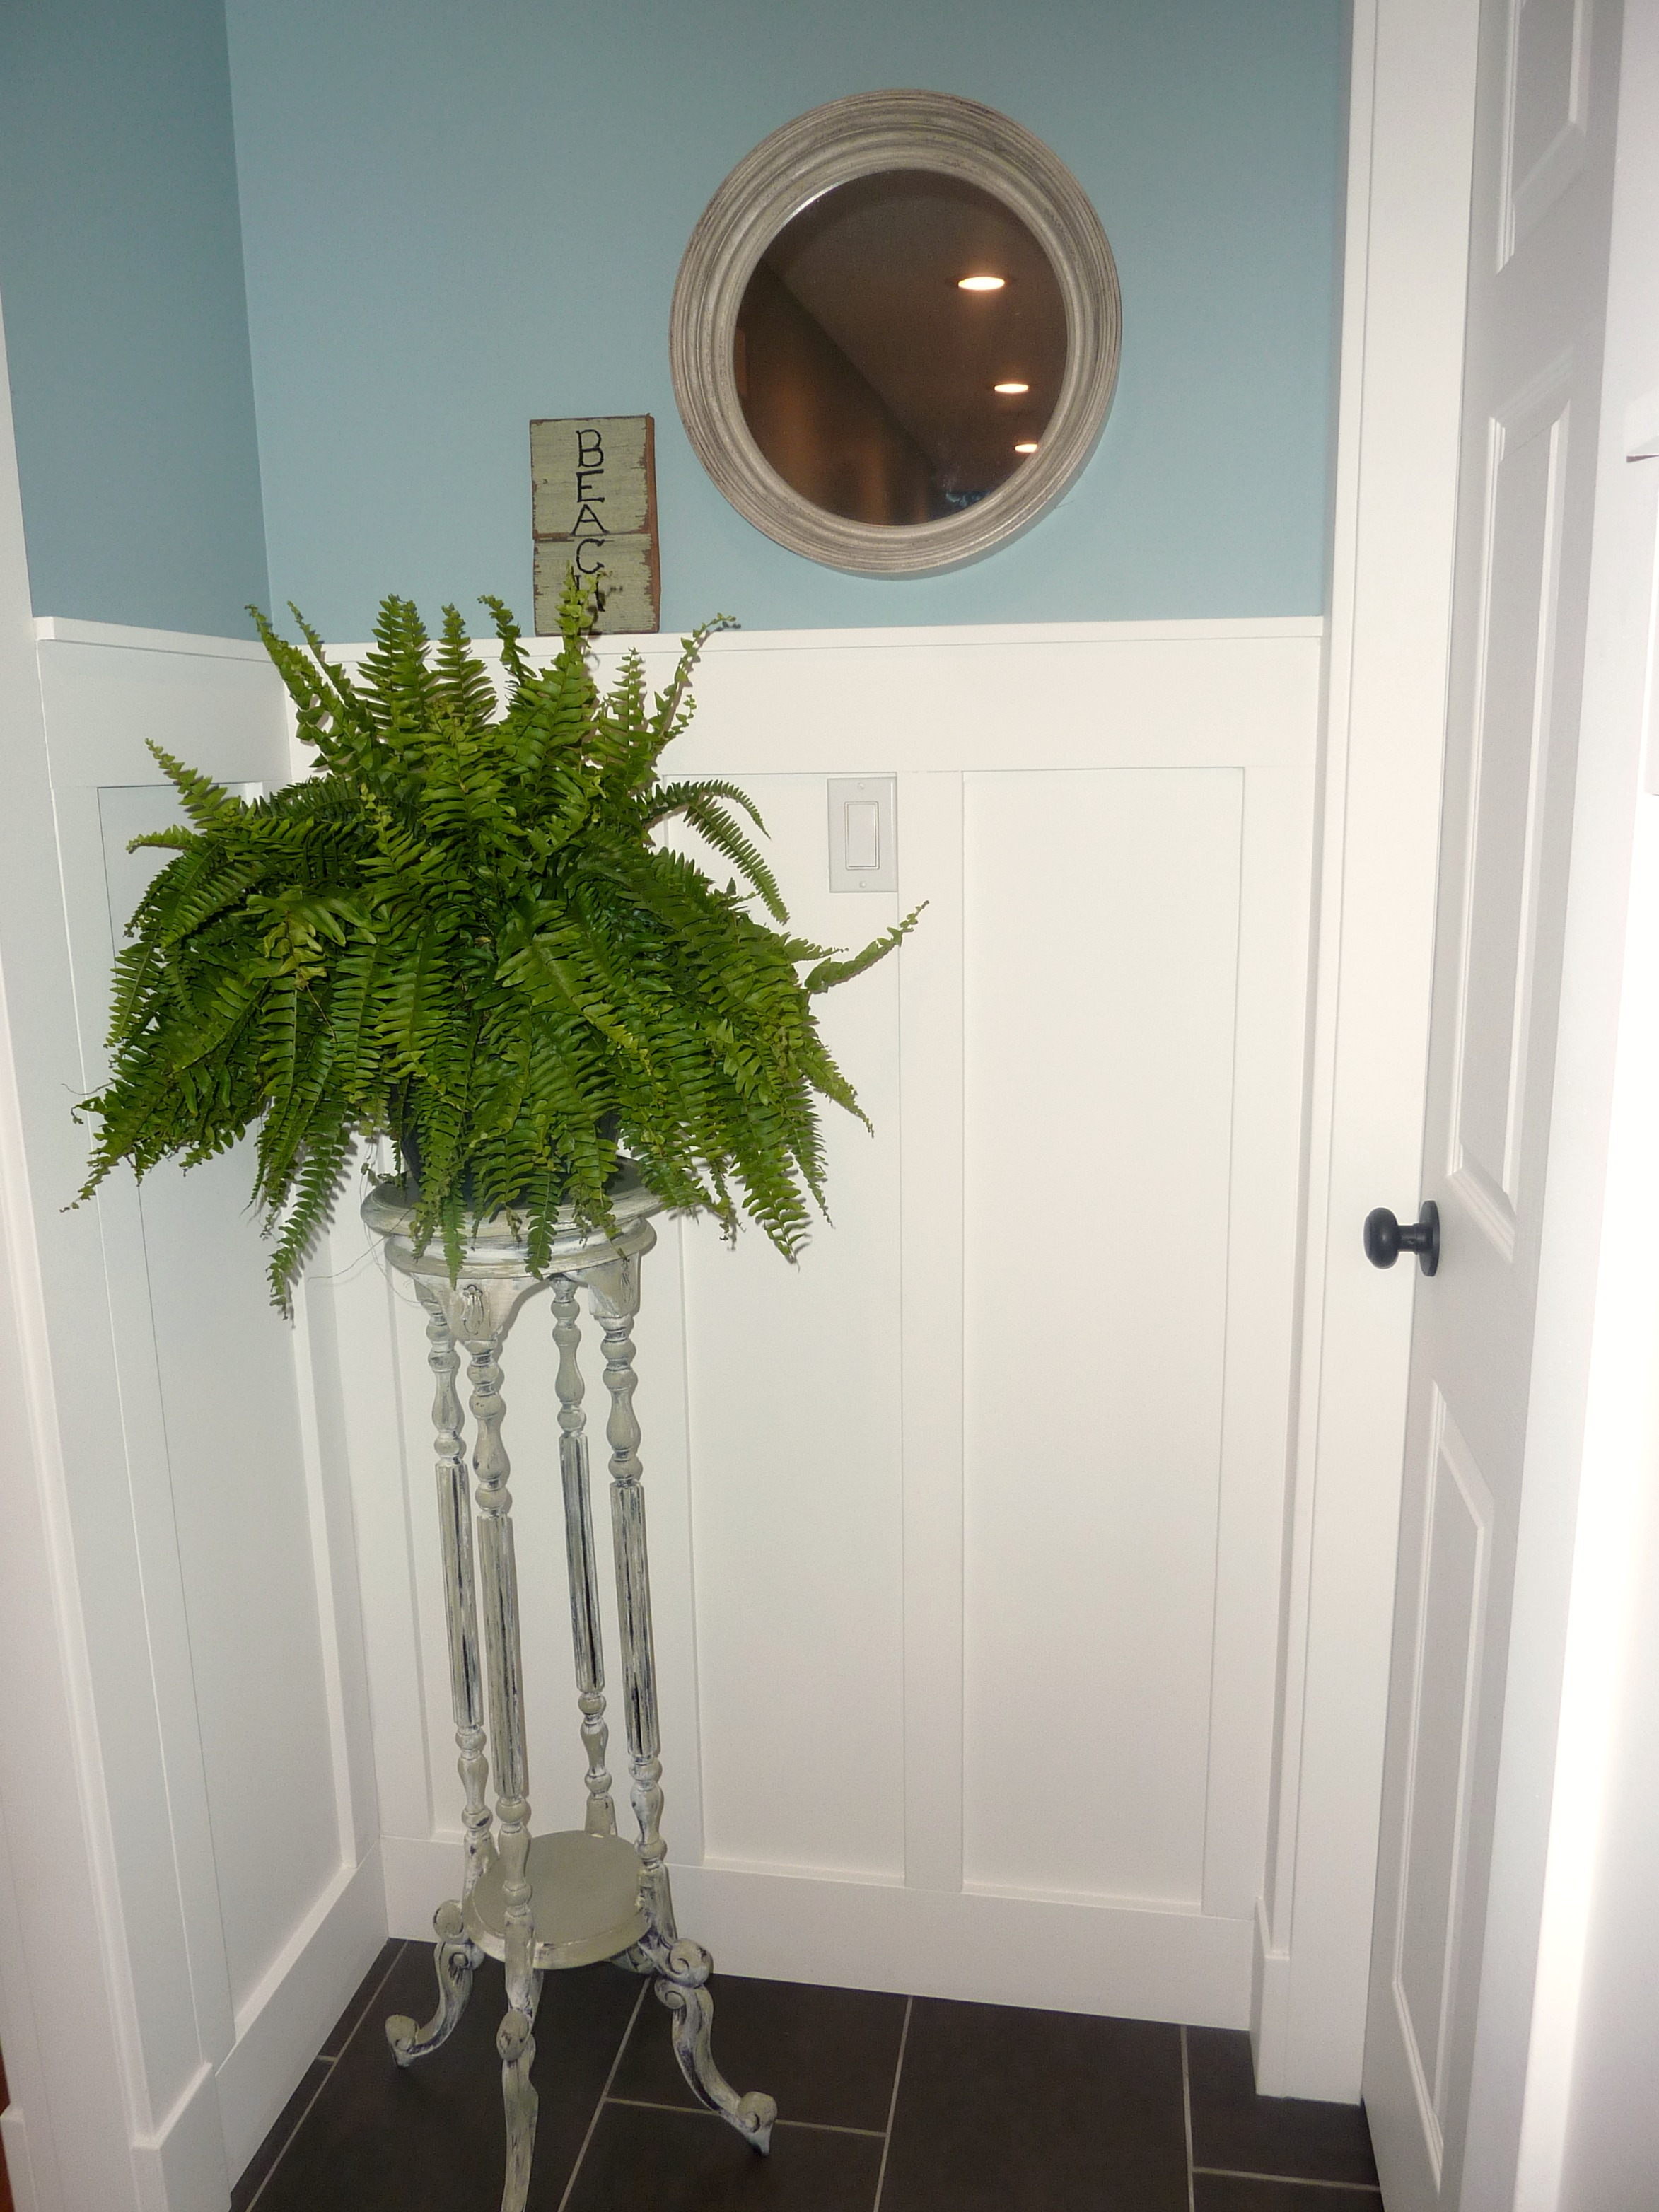 The plant stand and mirror at the end of the hall.